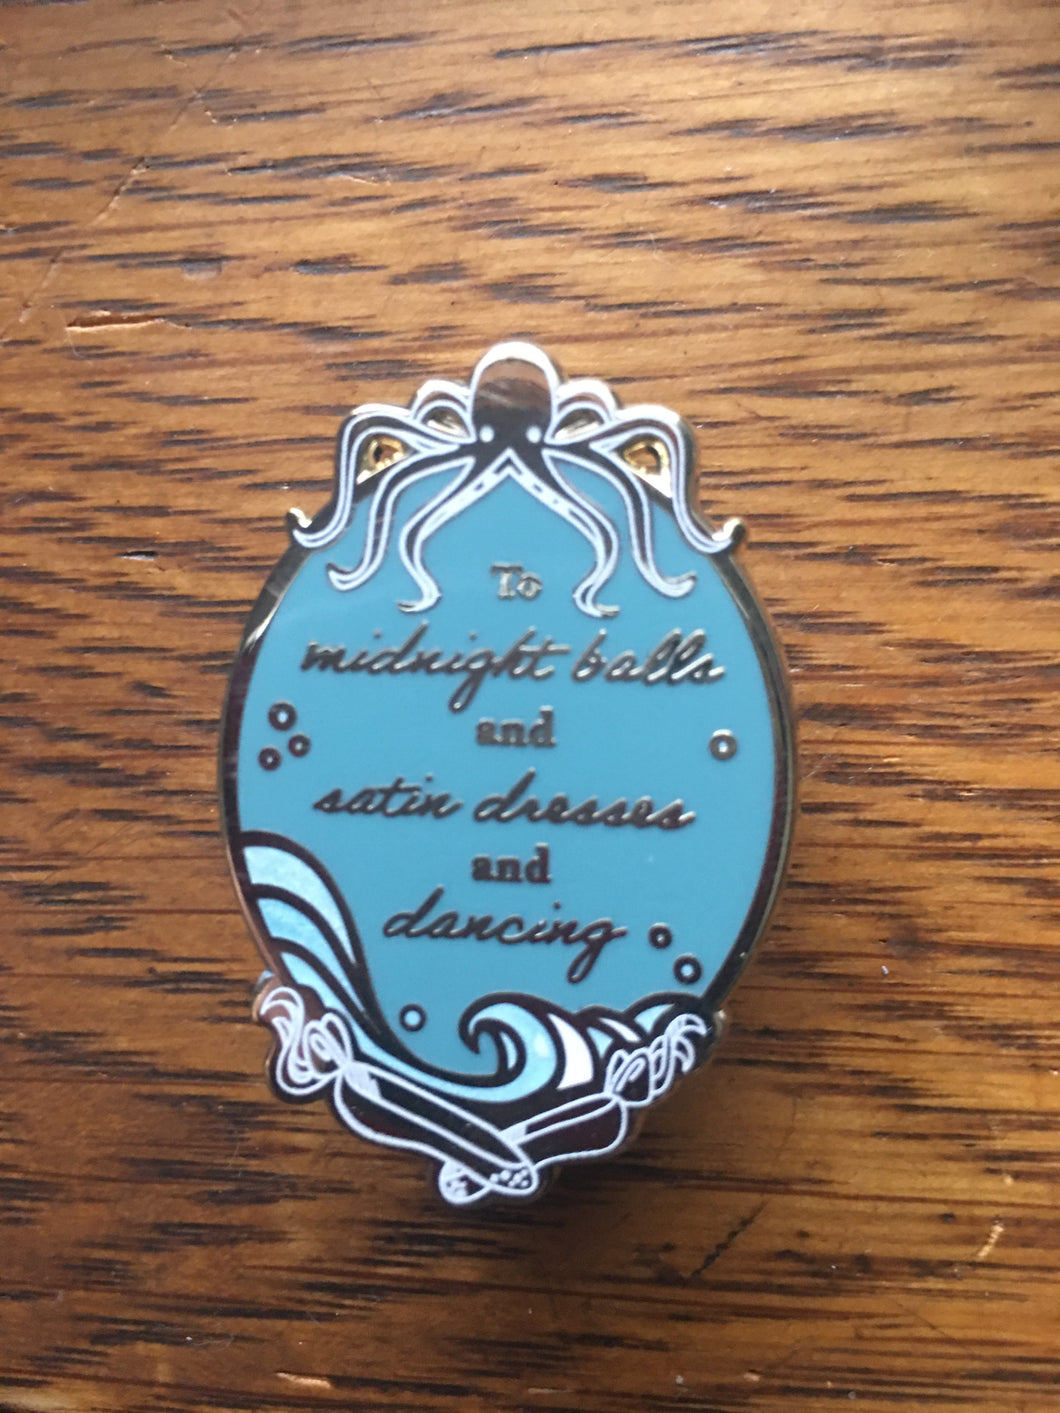 House of Salt & Sorrows inspired quote pin